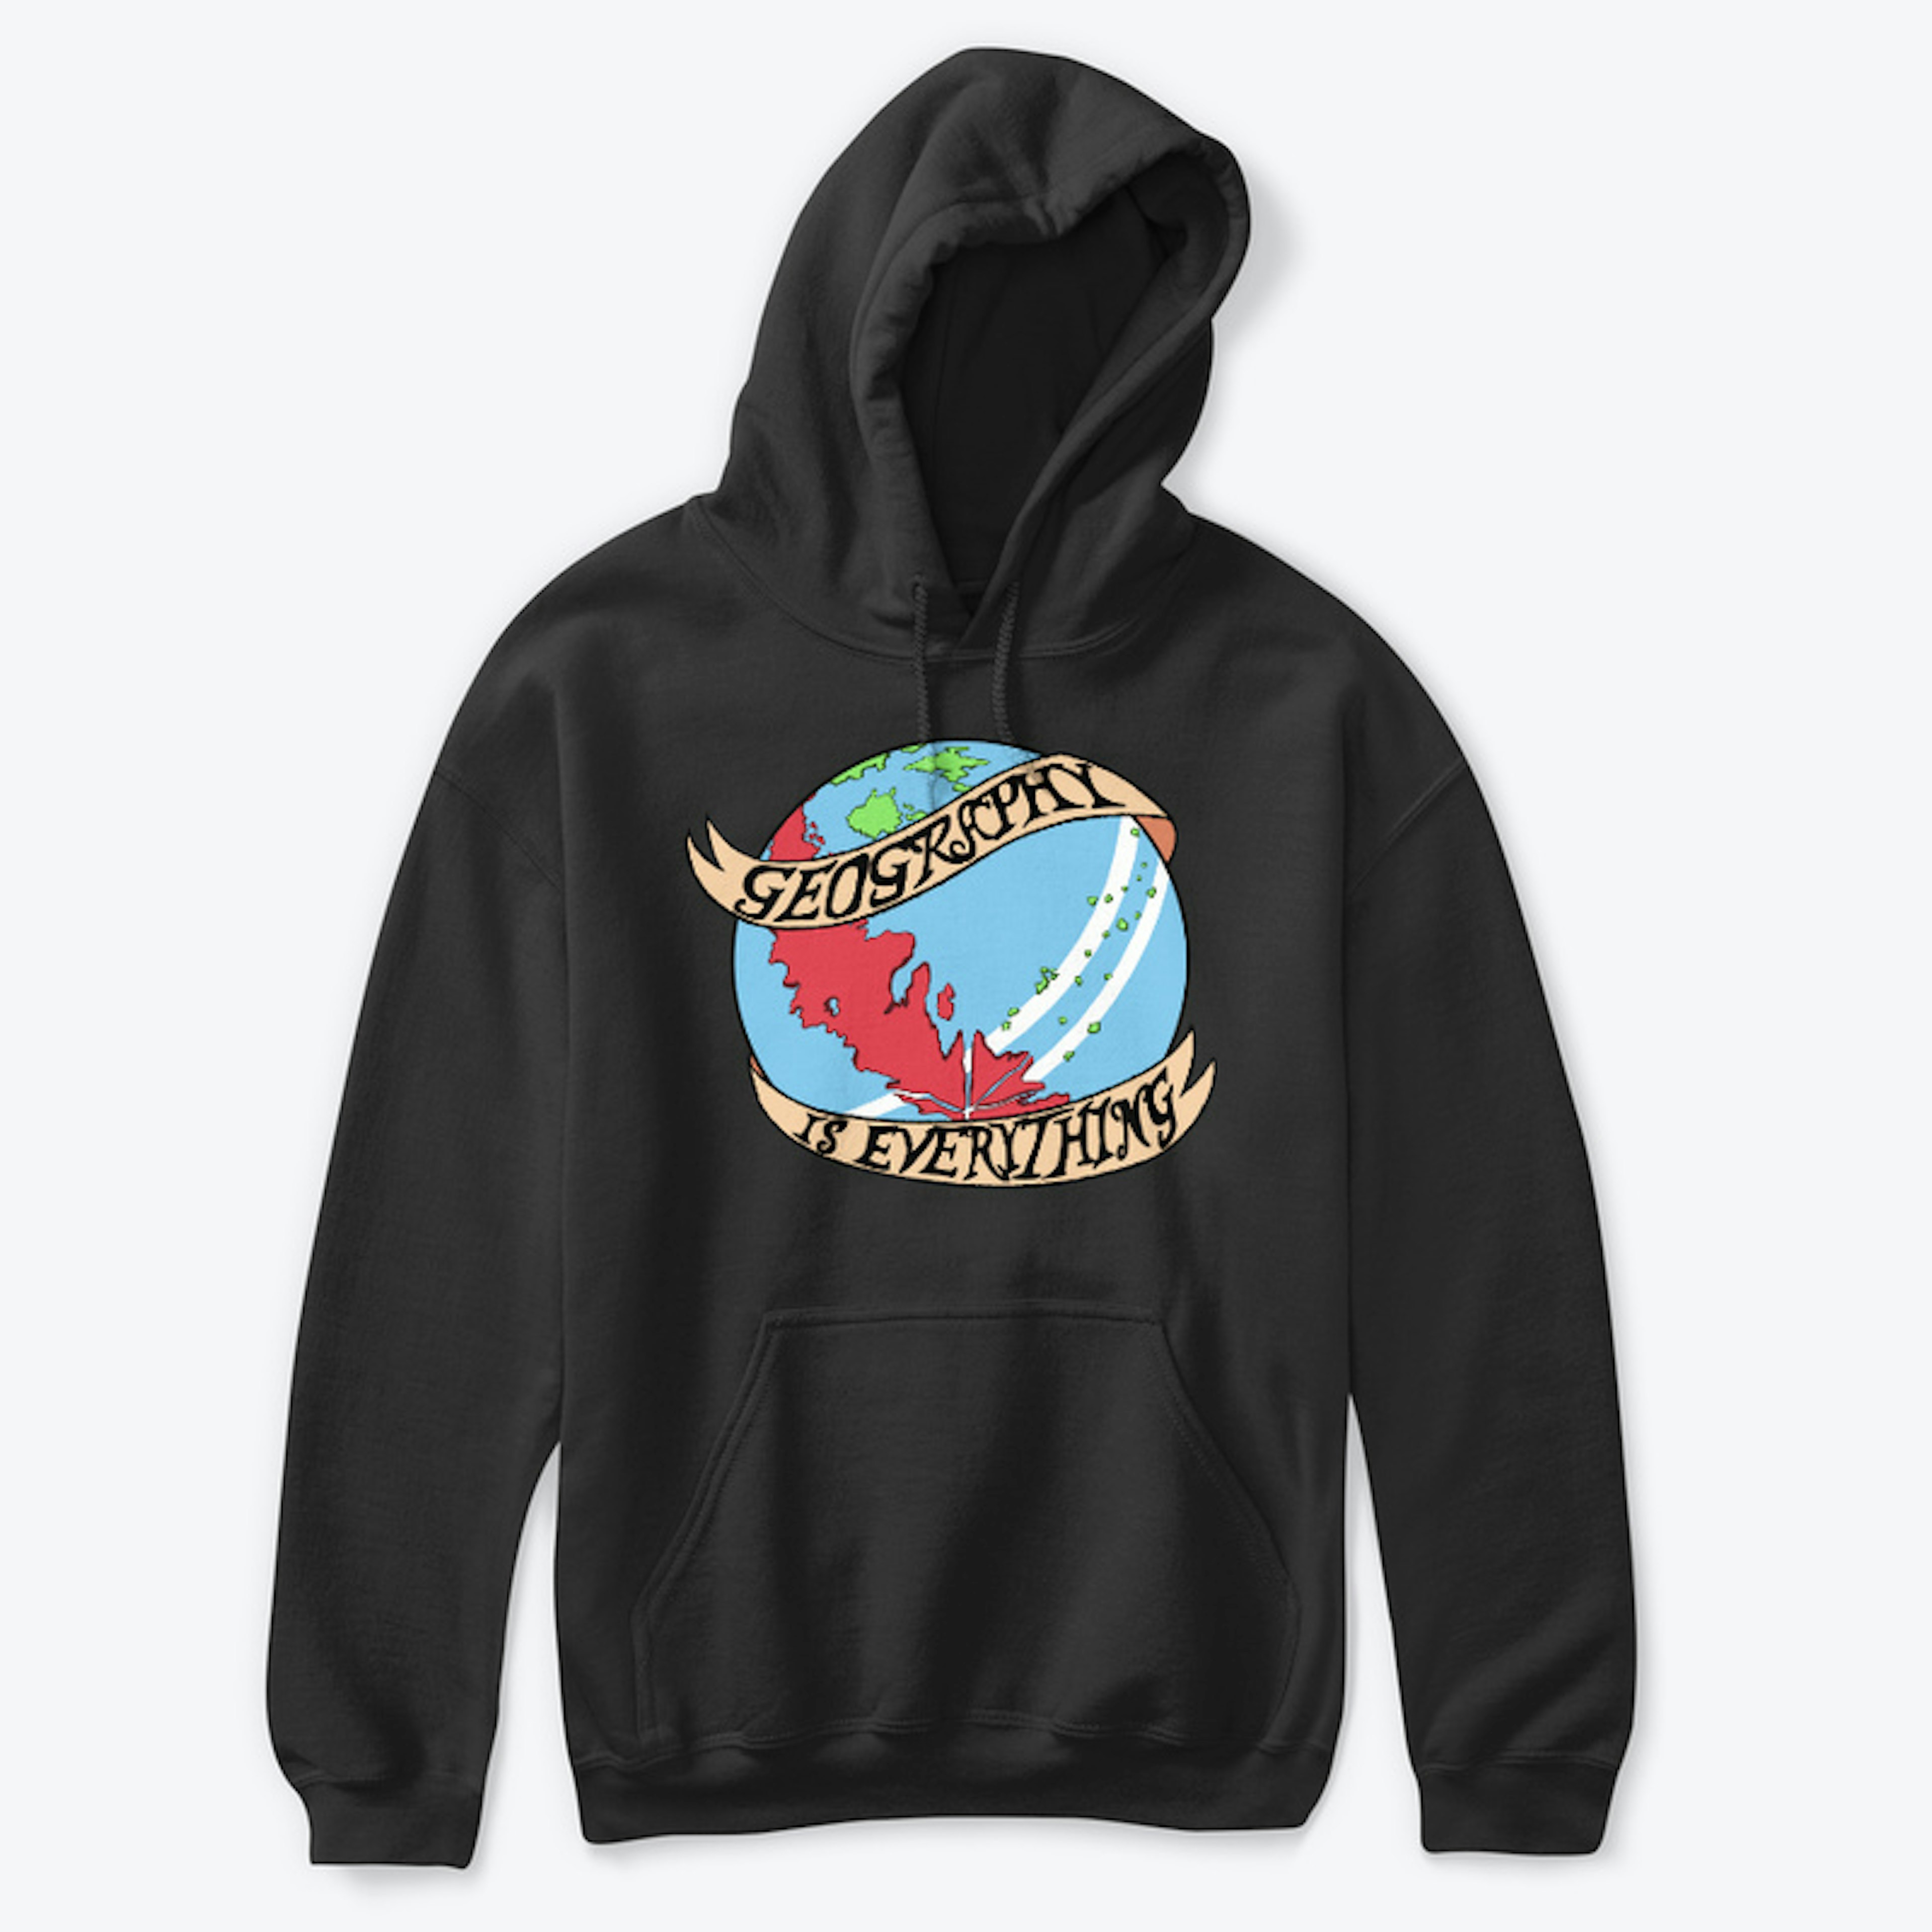 Geography Is Everything! Hoodie